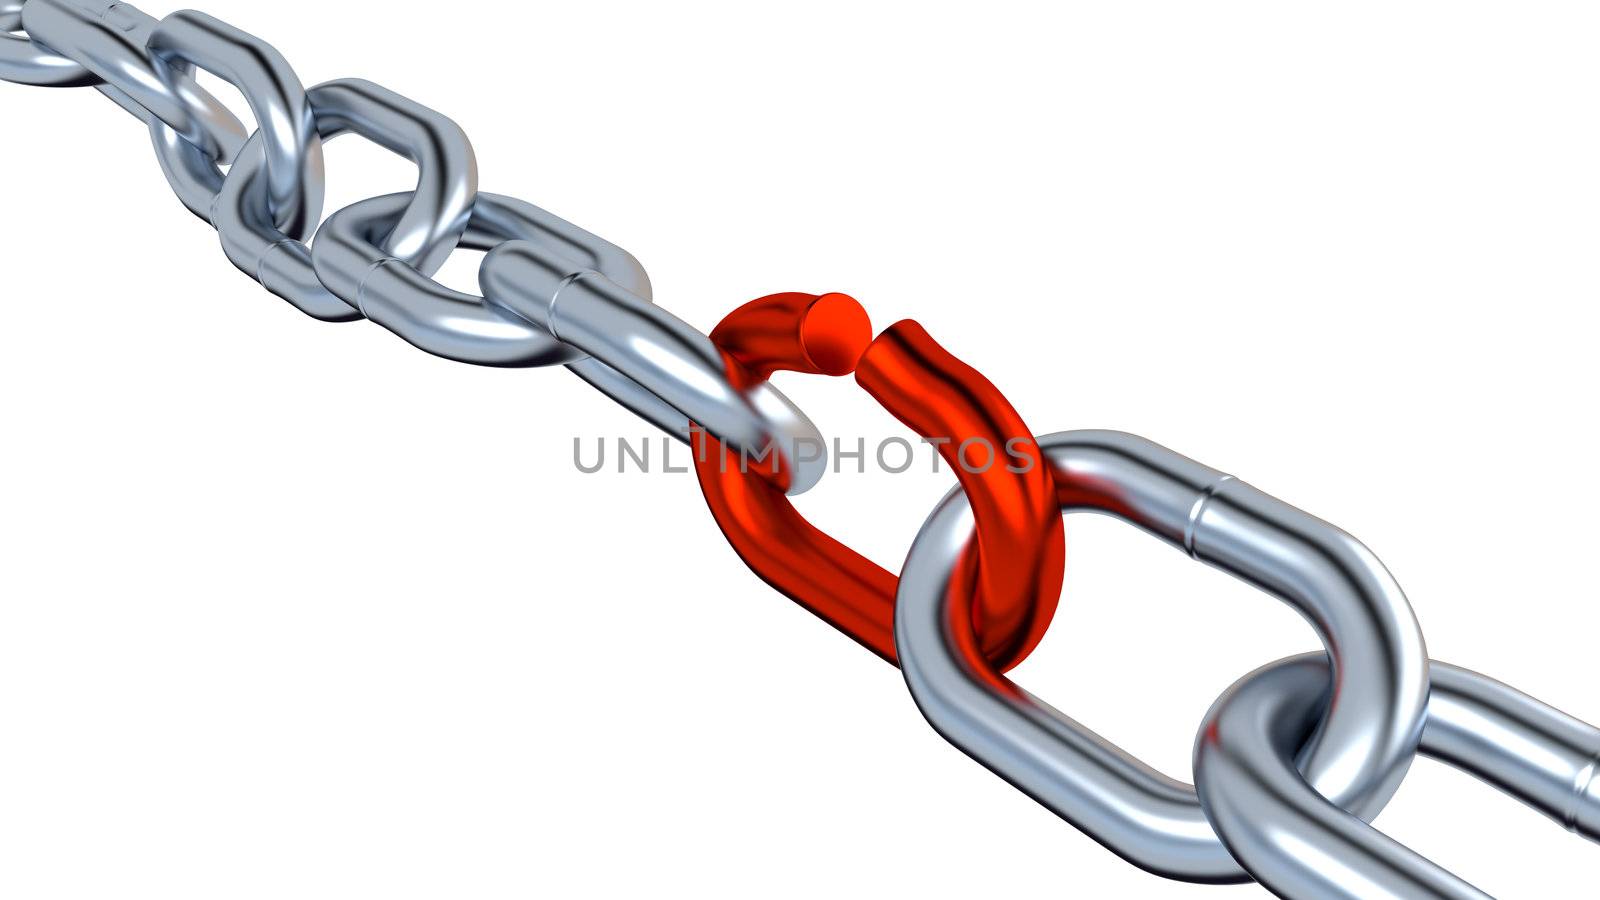 Metallic Chain with One Red Link on a White Background